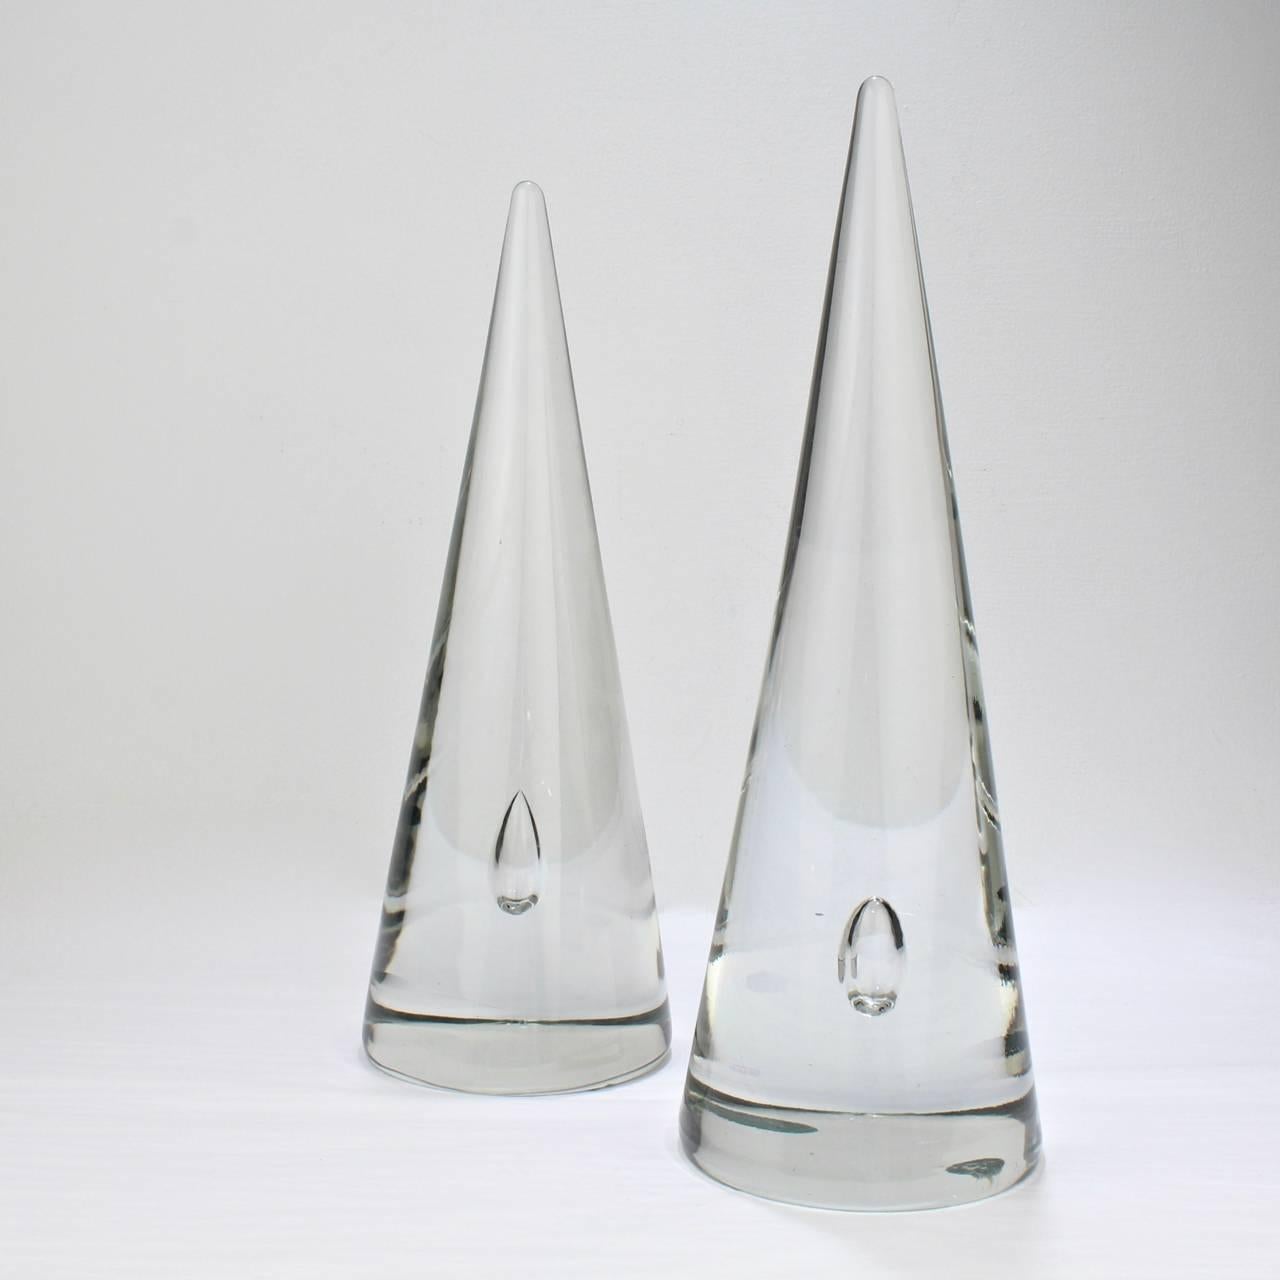 A good, assembled pair of Barbini glass cones. 

Simple lines that are perfect for a Modern interior.

Each has a captured bubble centered in interior near the base.

Both bear an etched Barbini signature at the base of each cone.

Heights: